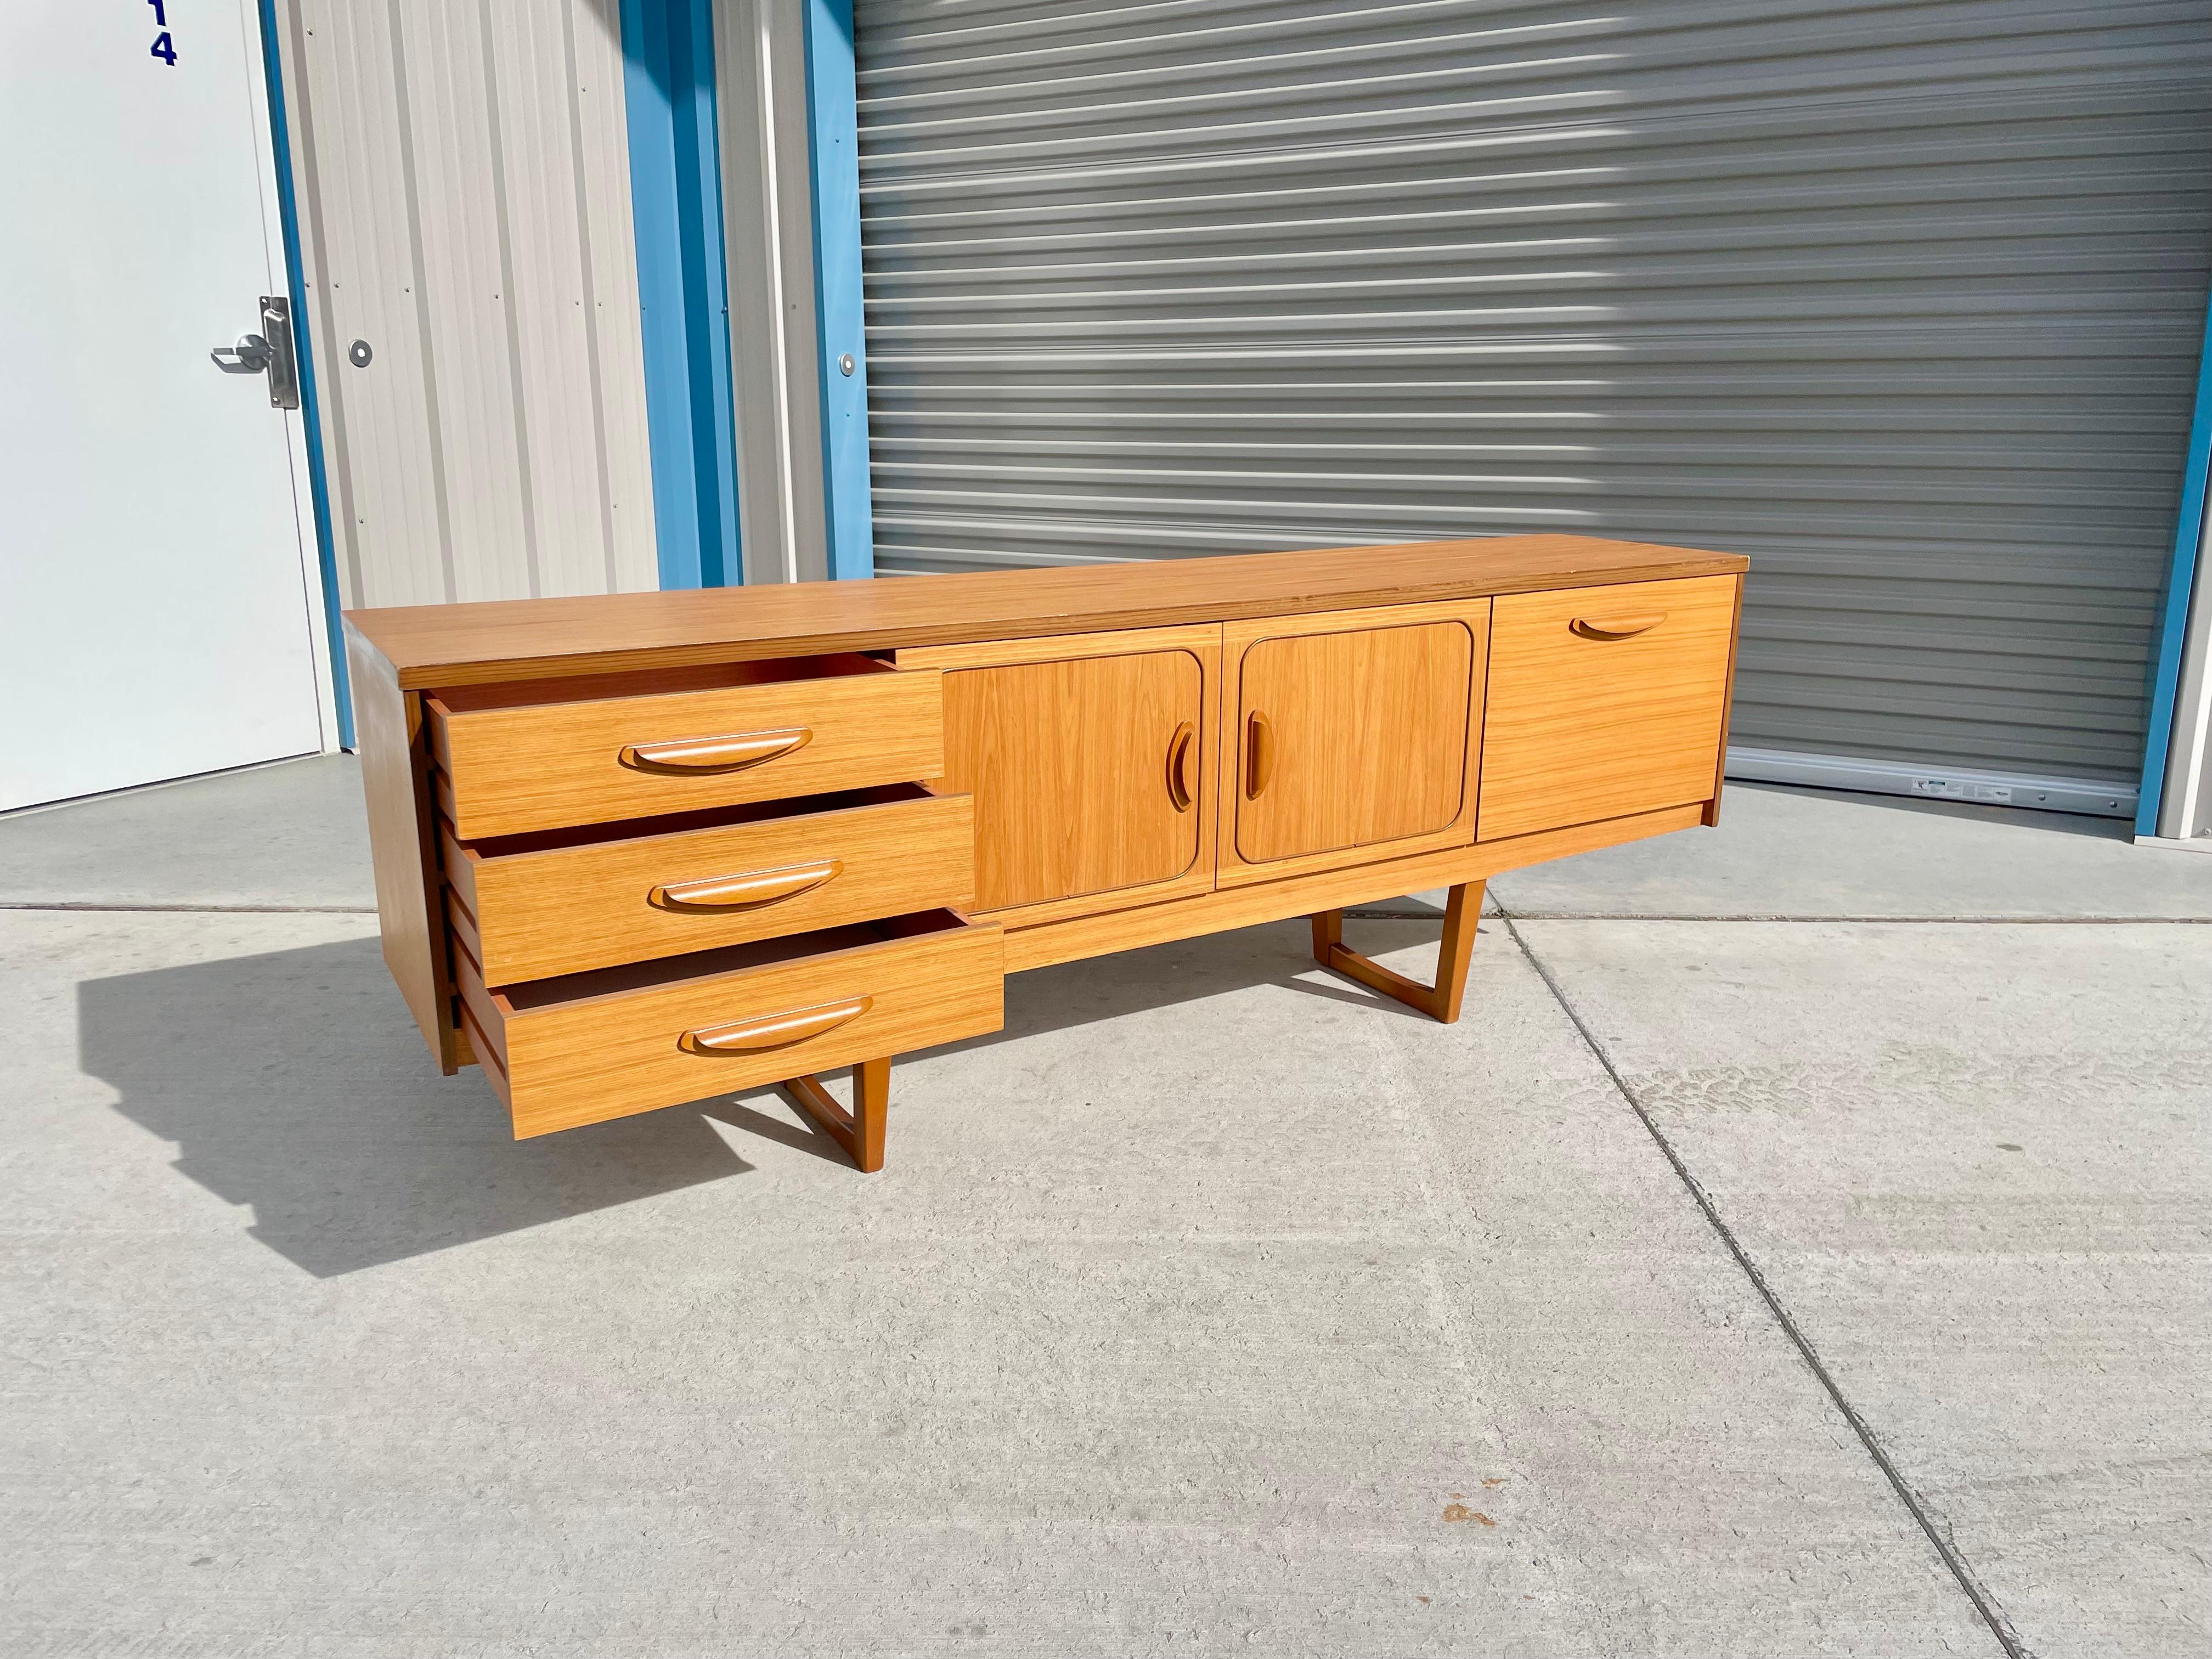 1960s Danish Modern Teak Side Board Credenza by Drylund In Good Condition For Sale In North Hollywood, CA